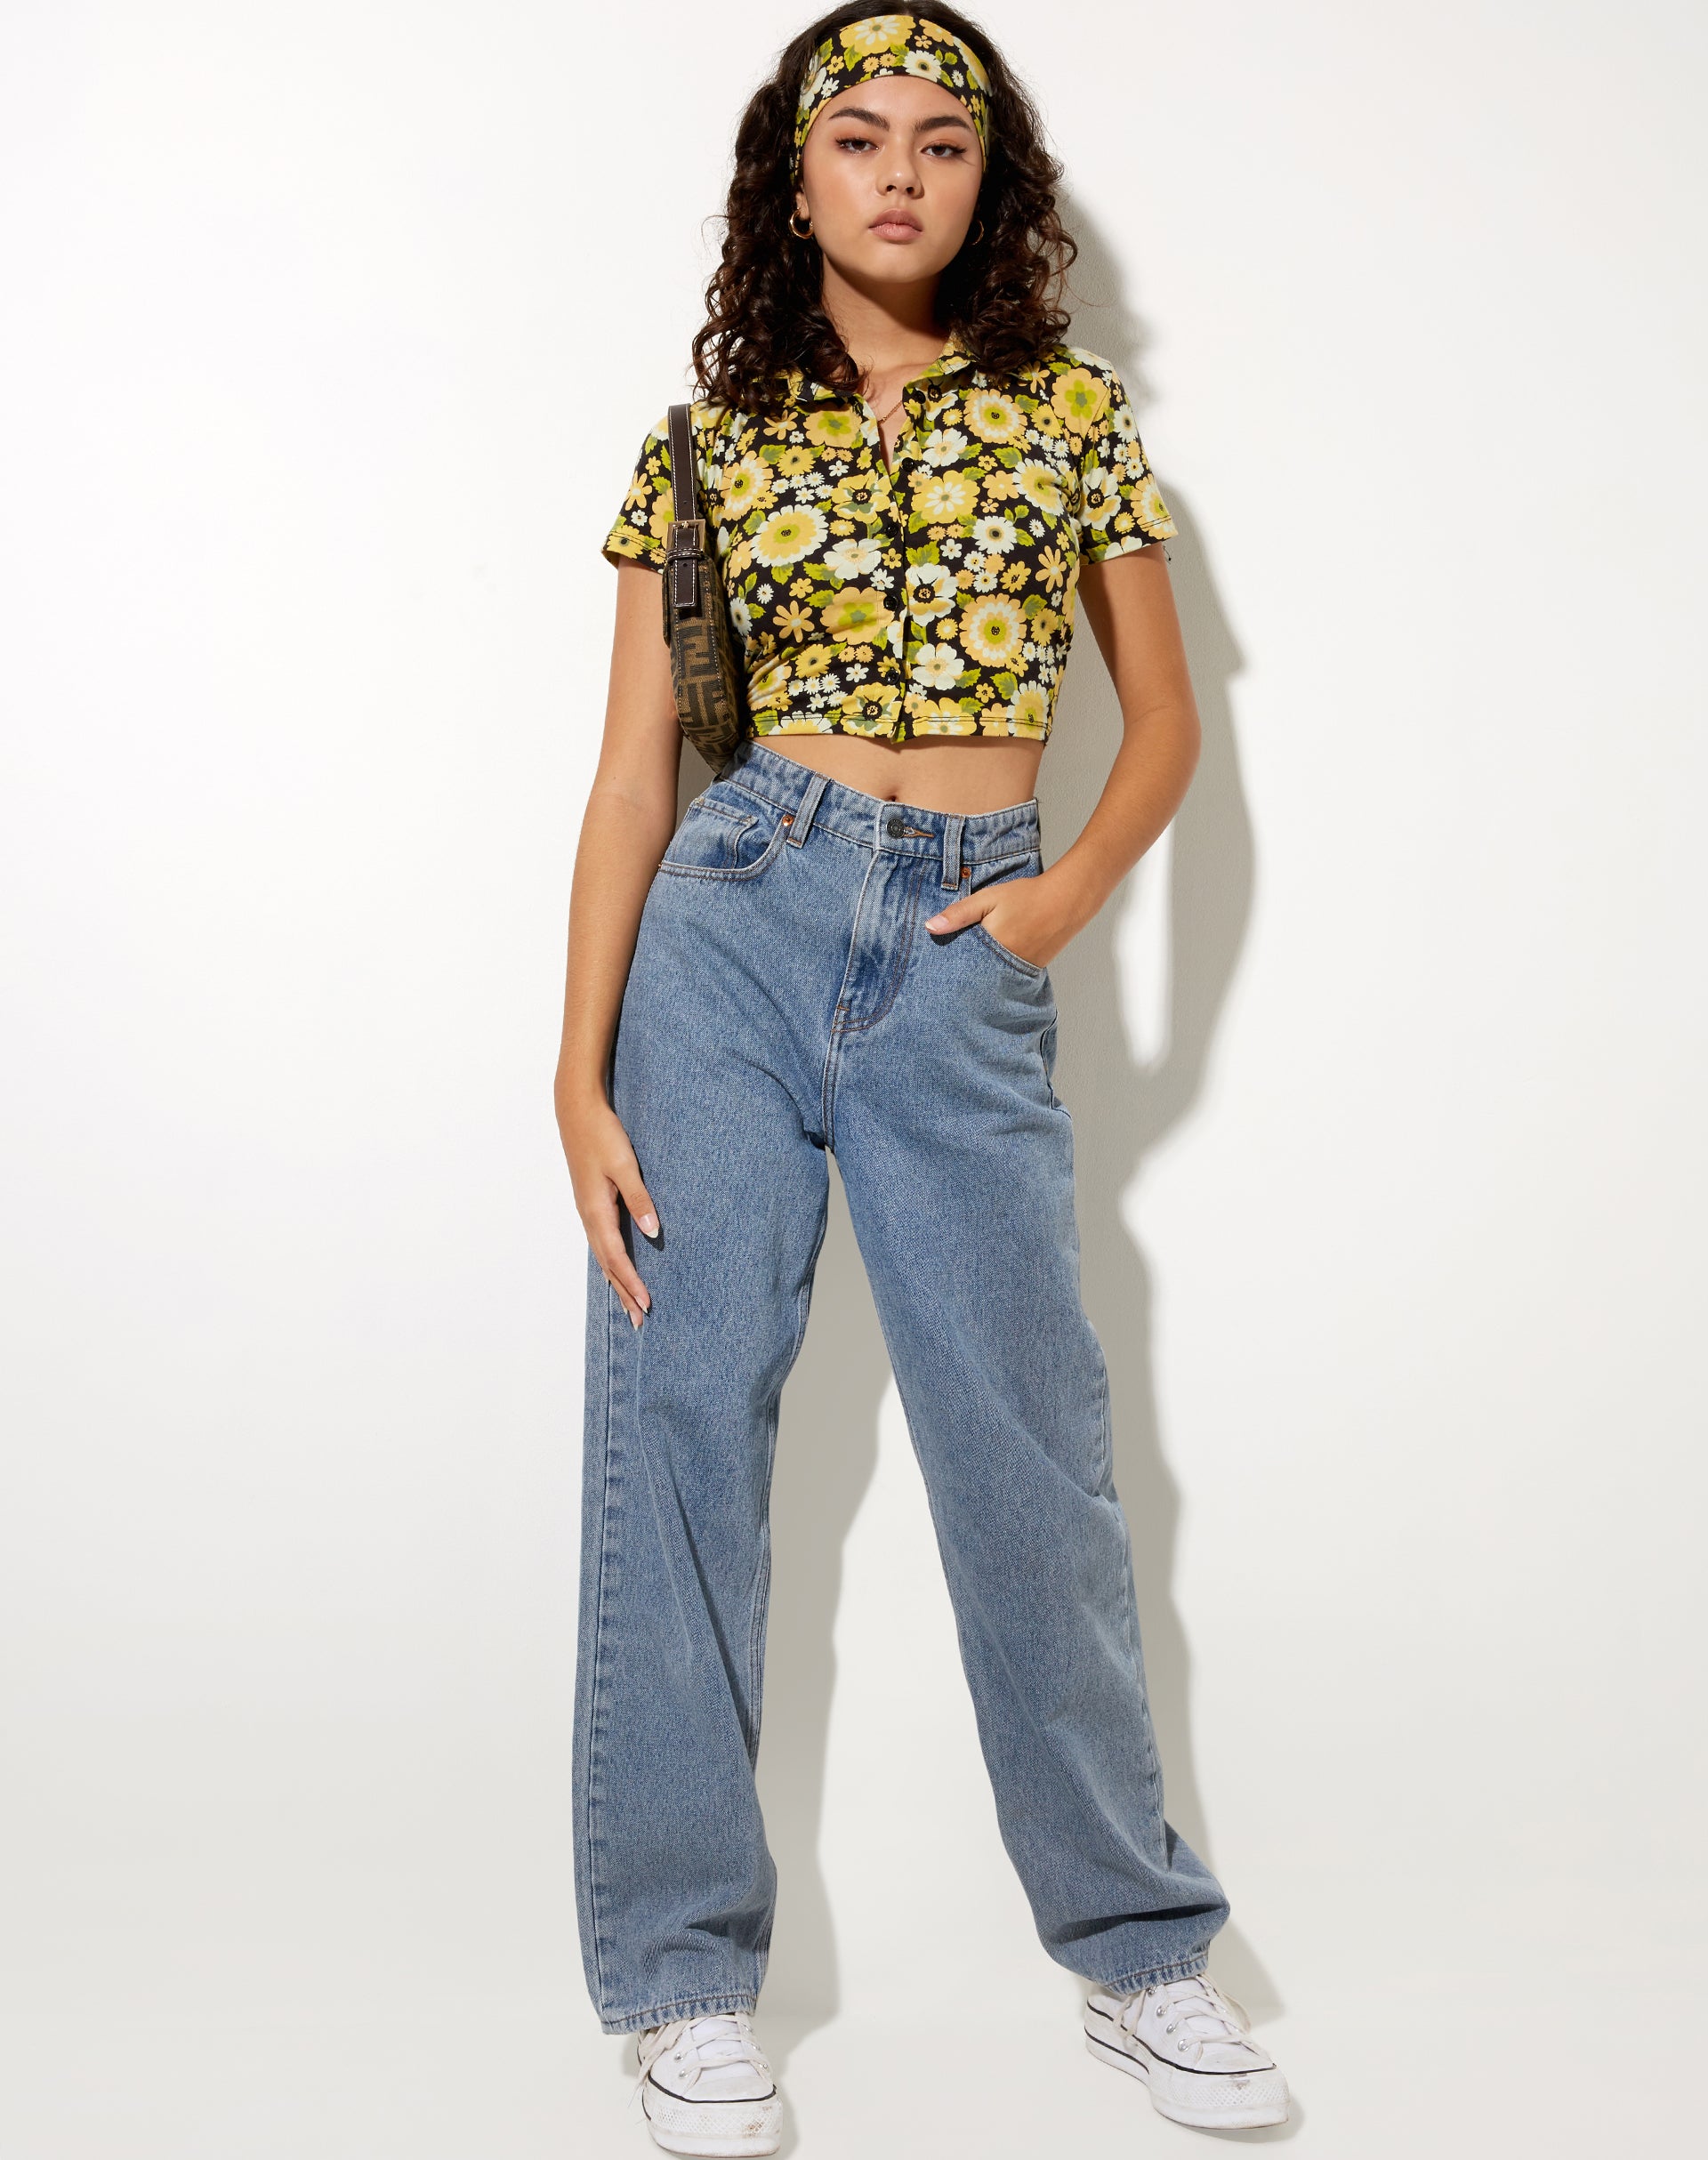 Image of Wuma Cropped Shirt in Retro Floral